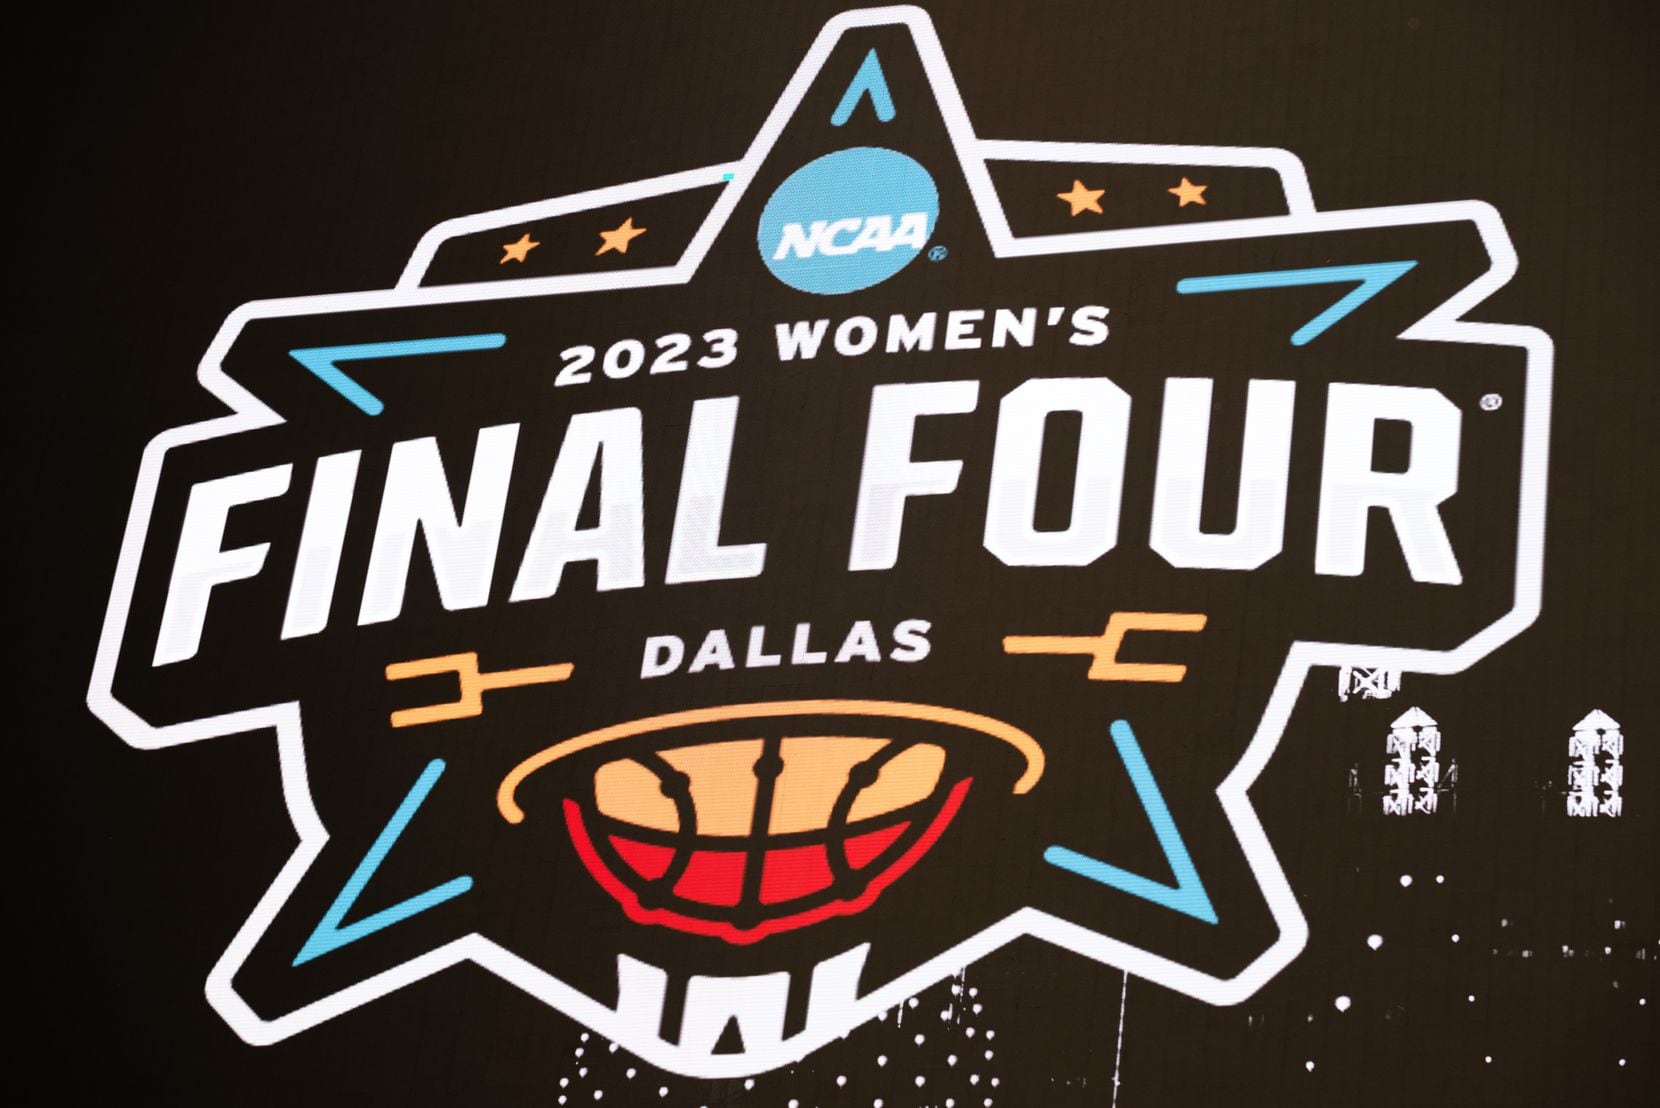 Photos There it is! The NCAA reveals the logo for the 2023 women's Final Four in Dallas